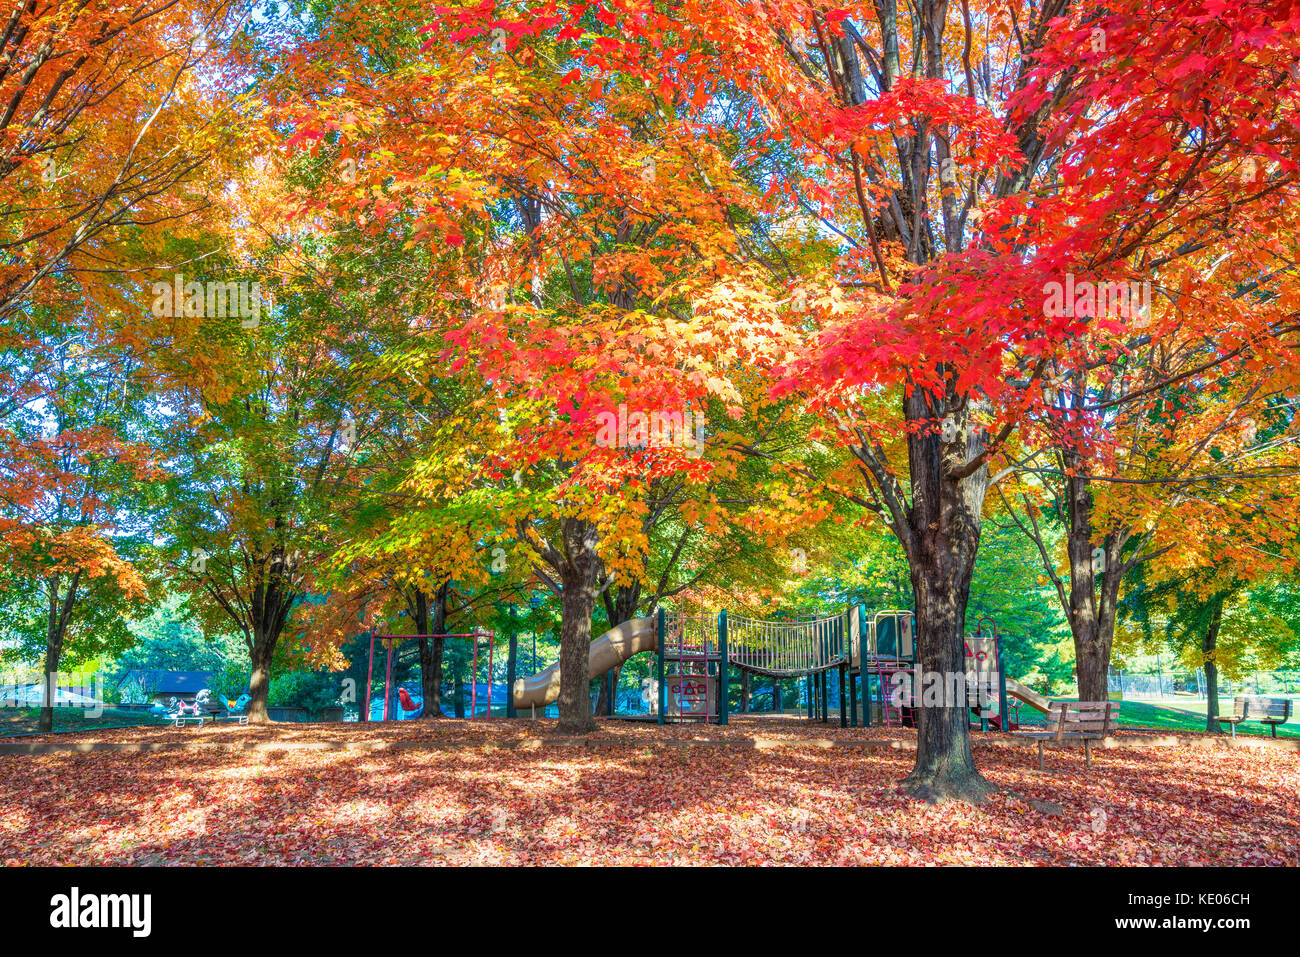 Trees with colorful autumn foliage give shade to a neighborhood playground. Stock Photo